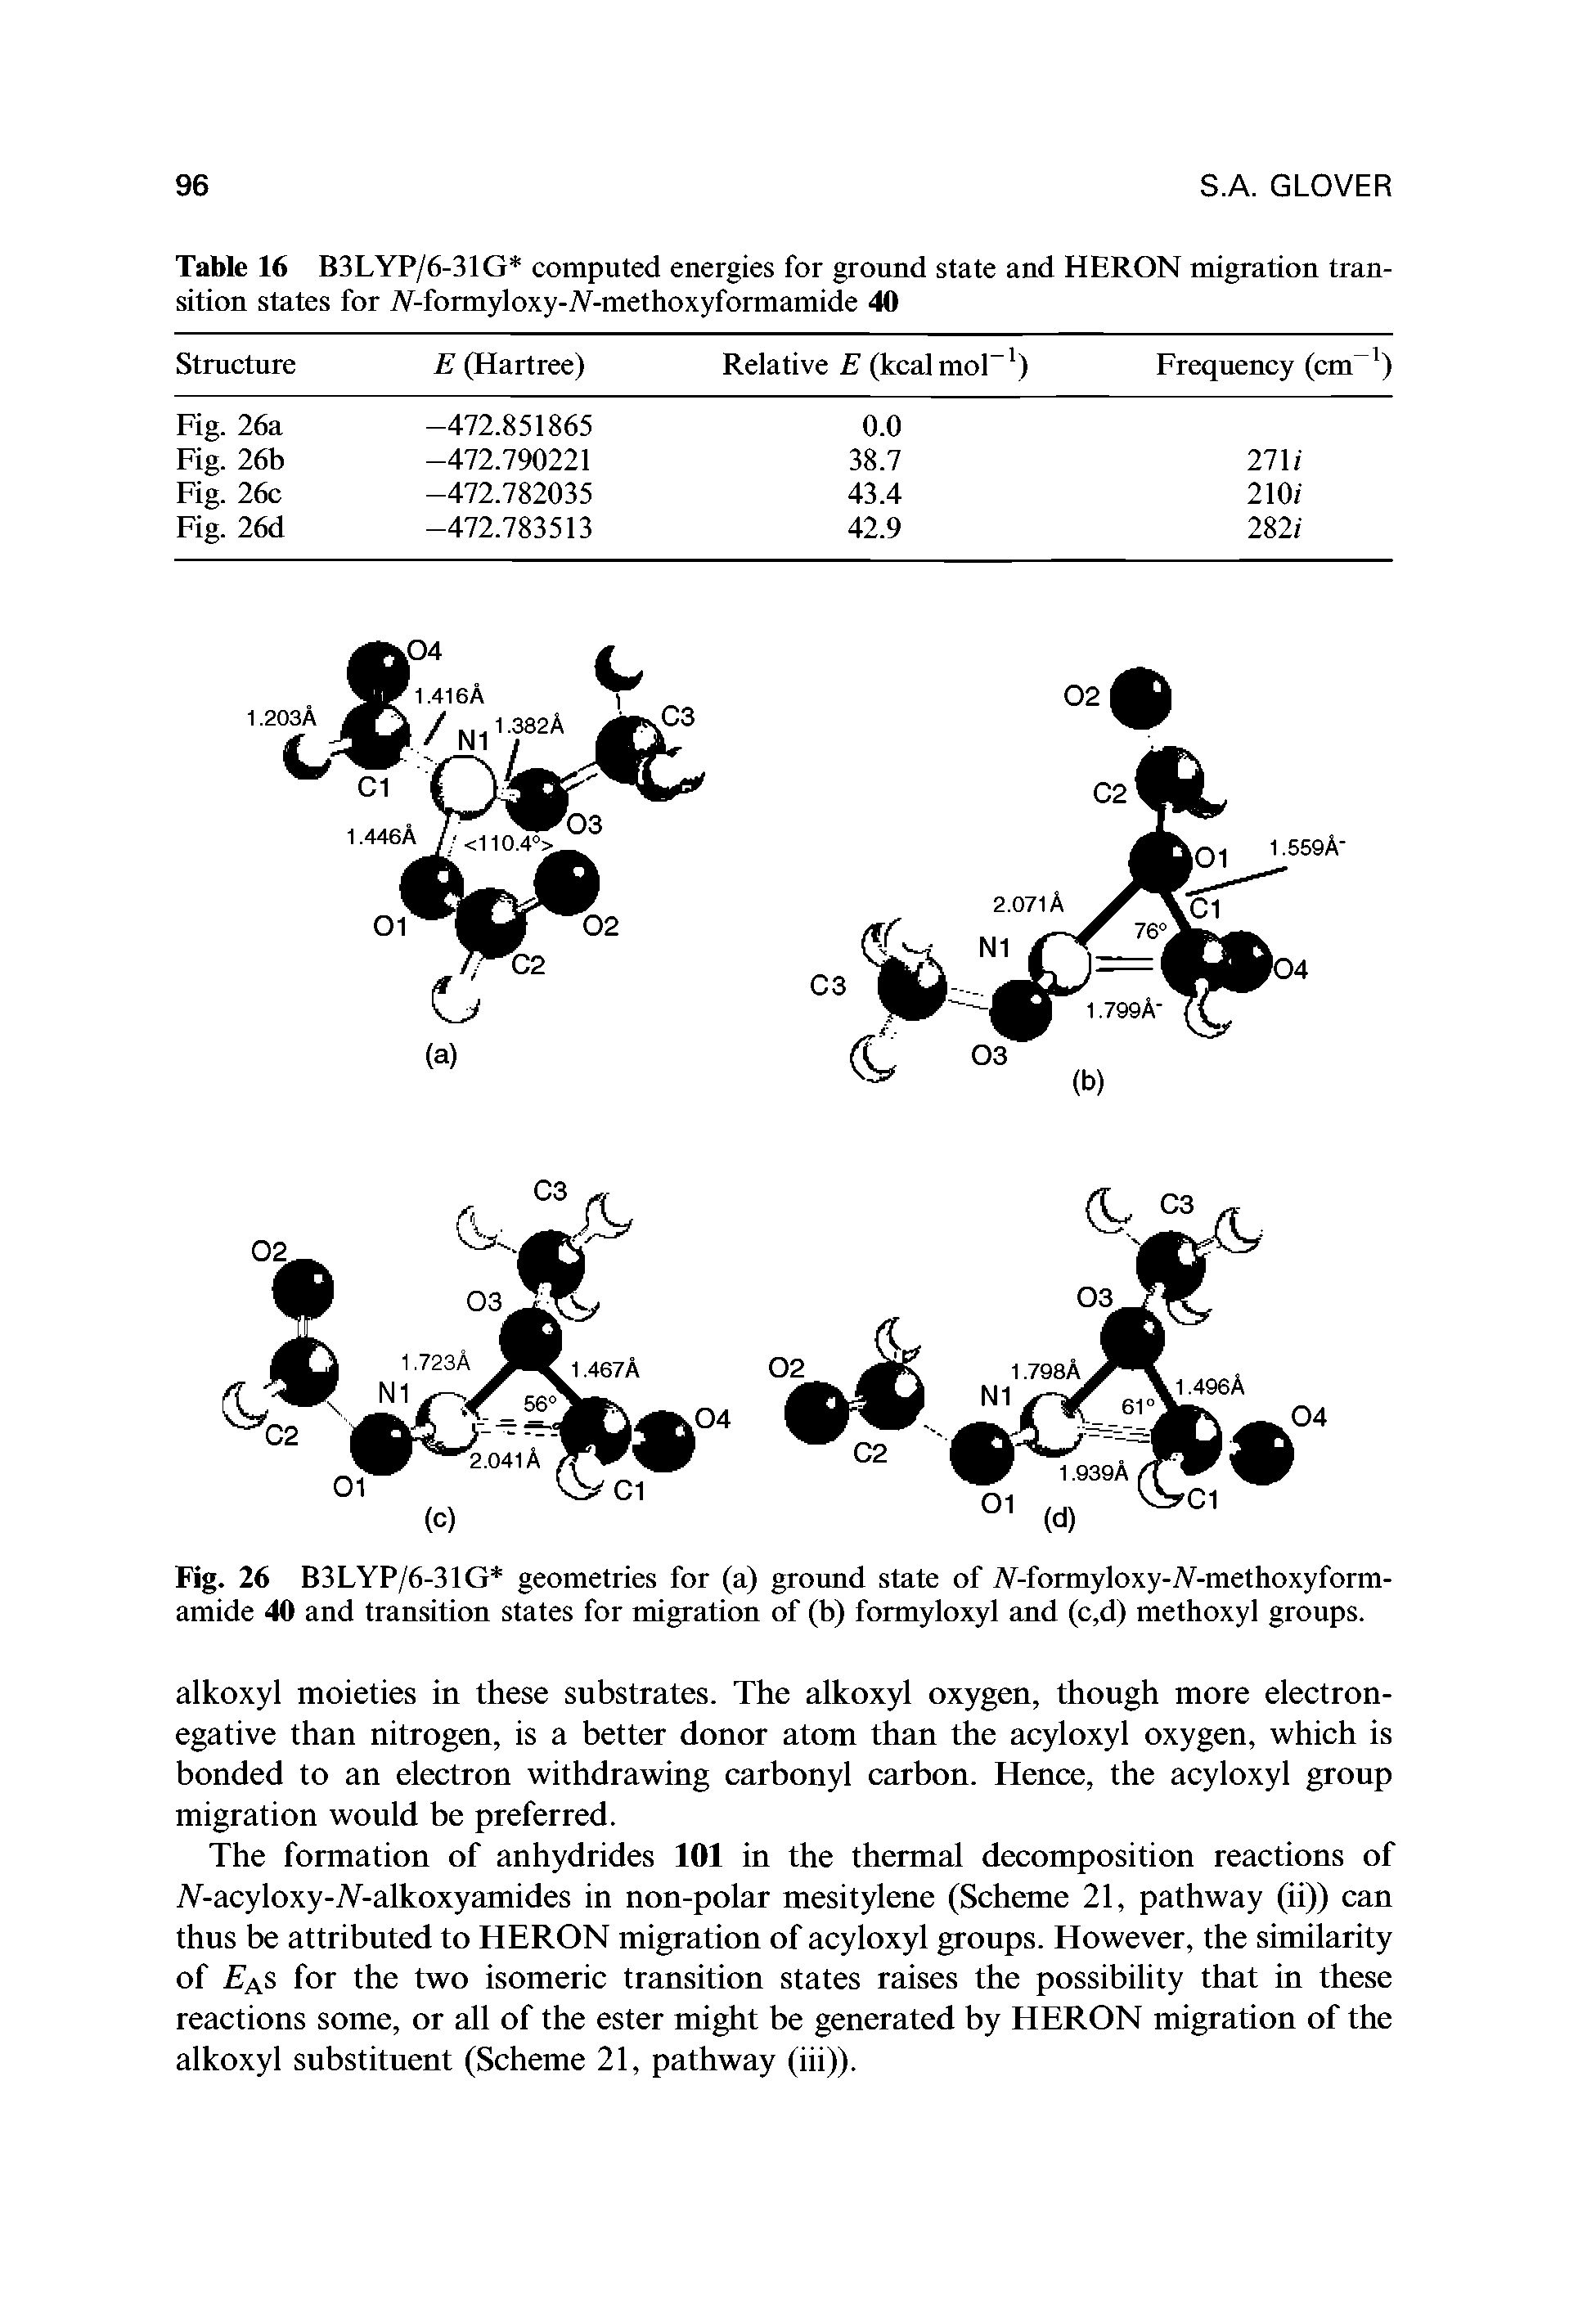 Table 16 B3LYP/6-31G computed energies for ground state and HERON migration transition states for /V-formyloxy-iV-methoxyformamide 40...